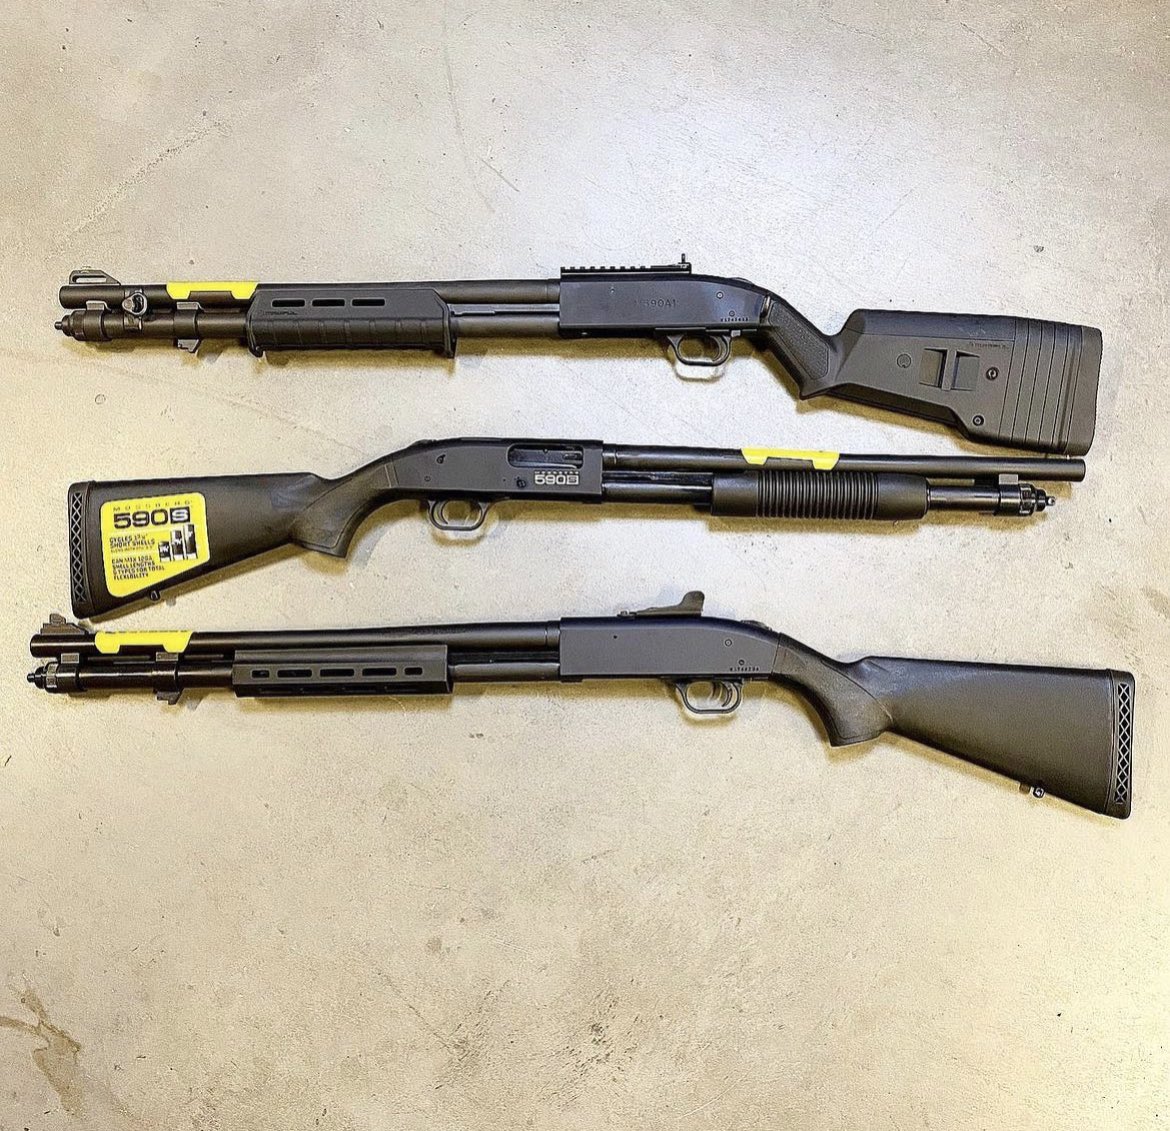 590 Trifecta! Here are a few of our favorite things!
#Mossberg #Mossberg590A1 #Mossberg #Mossberg590 #Mossberg590S